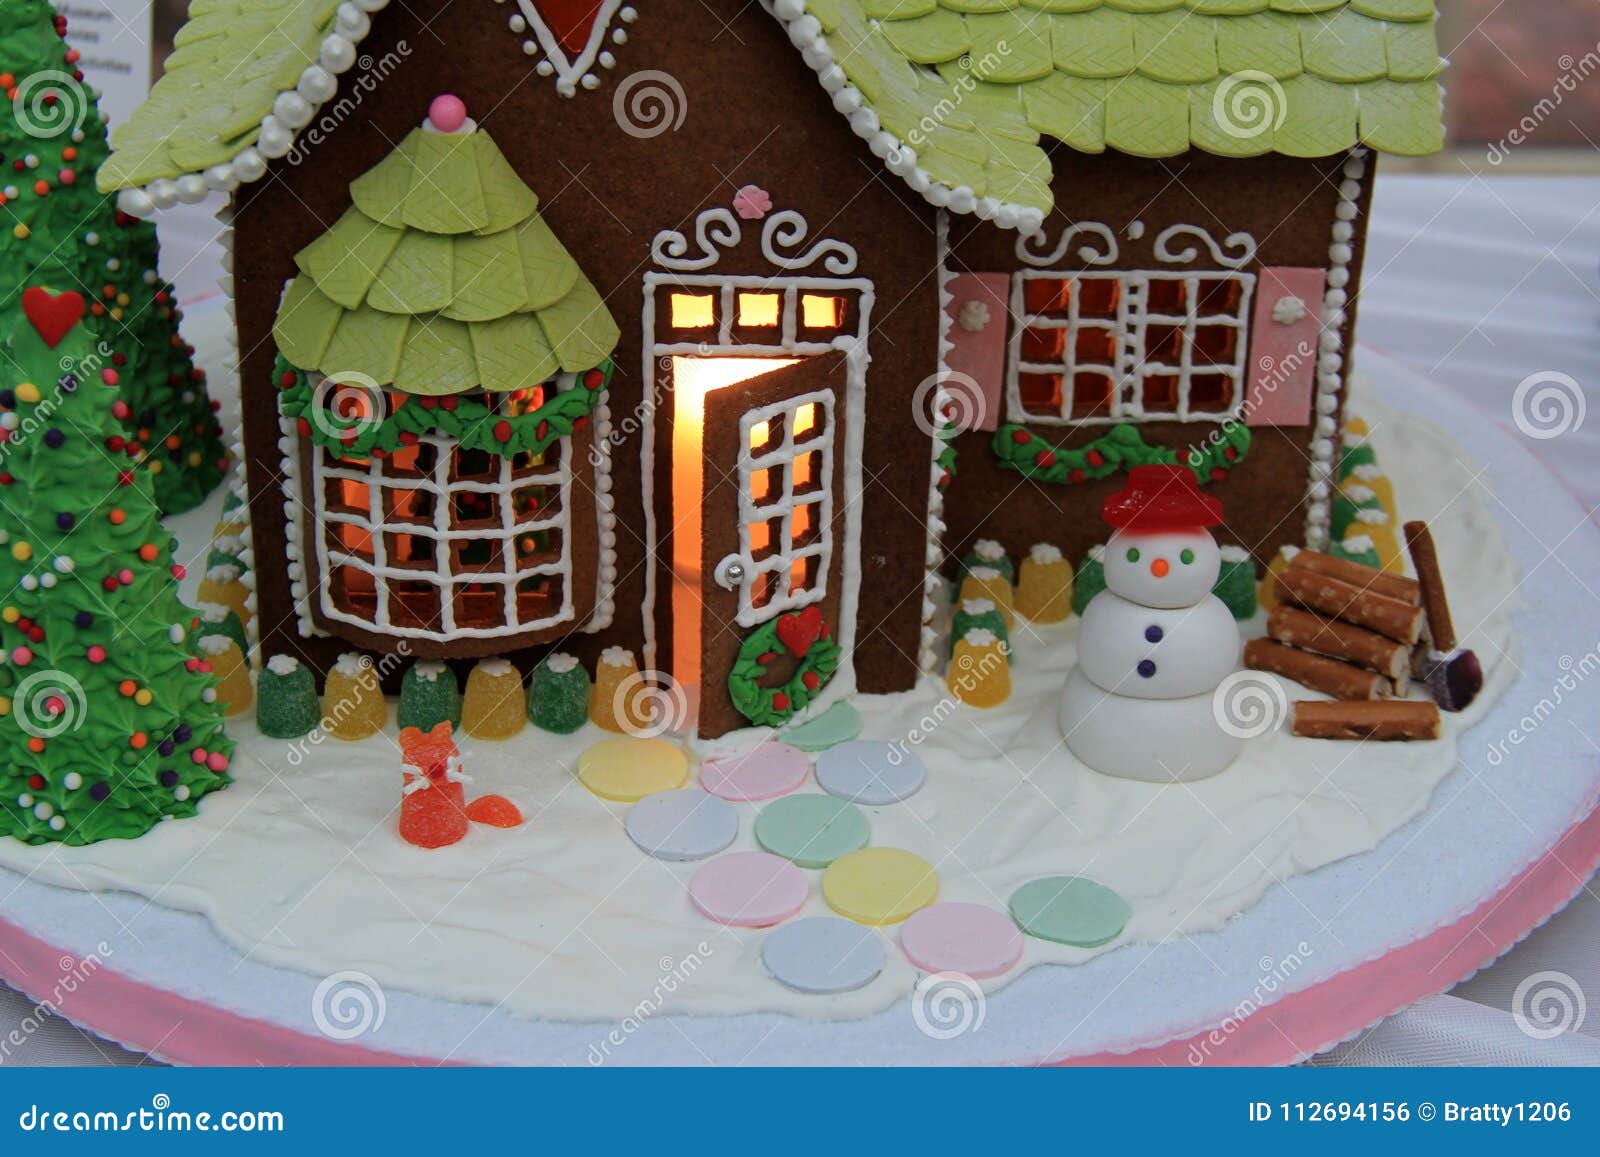 Adorable Gingerbread House entered into contest George Eastman House Rochester New York